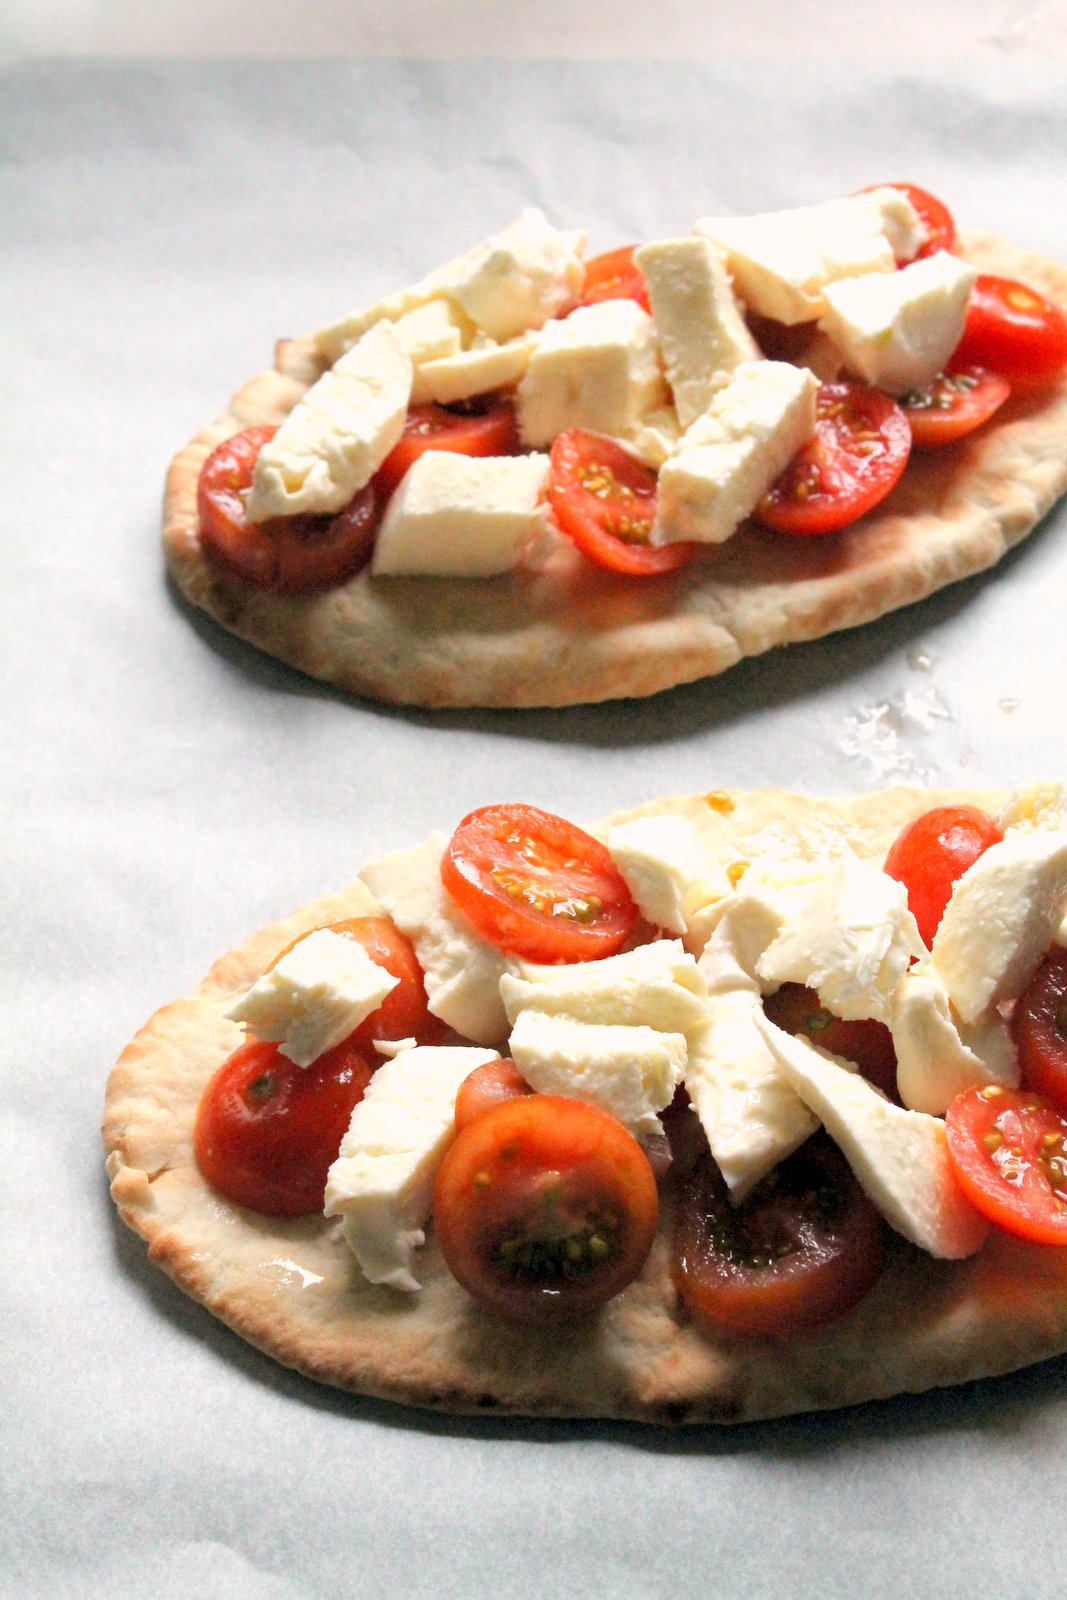 This is a simple pita pizza which can be put together in 15 minutes, and that includes making the chive pesto from scratch! A great #vegetarian lunch or snack.